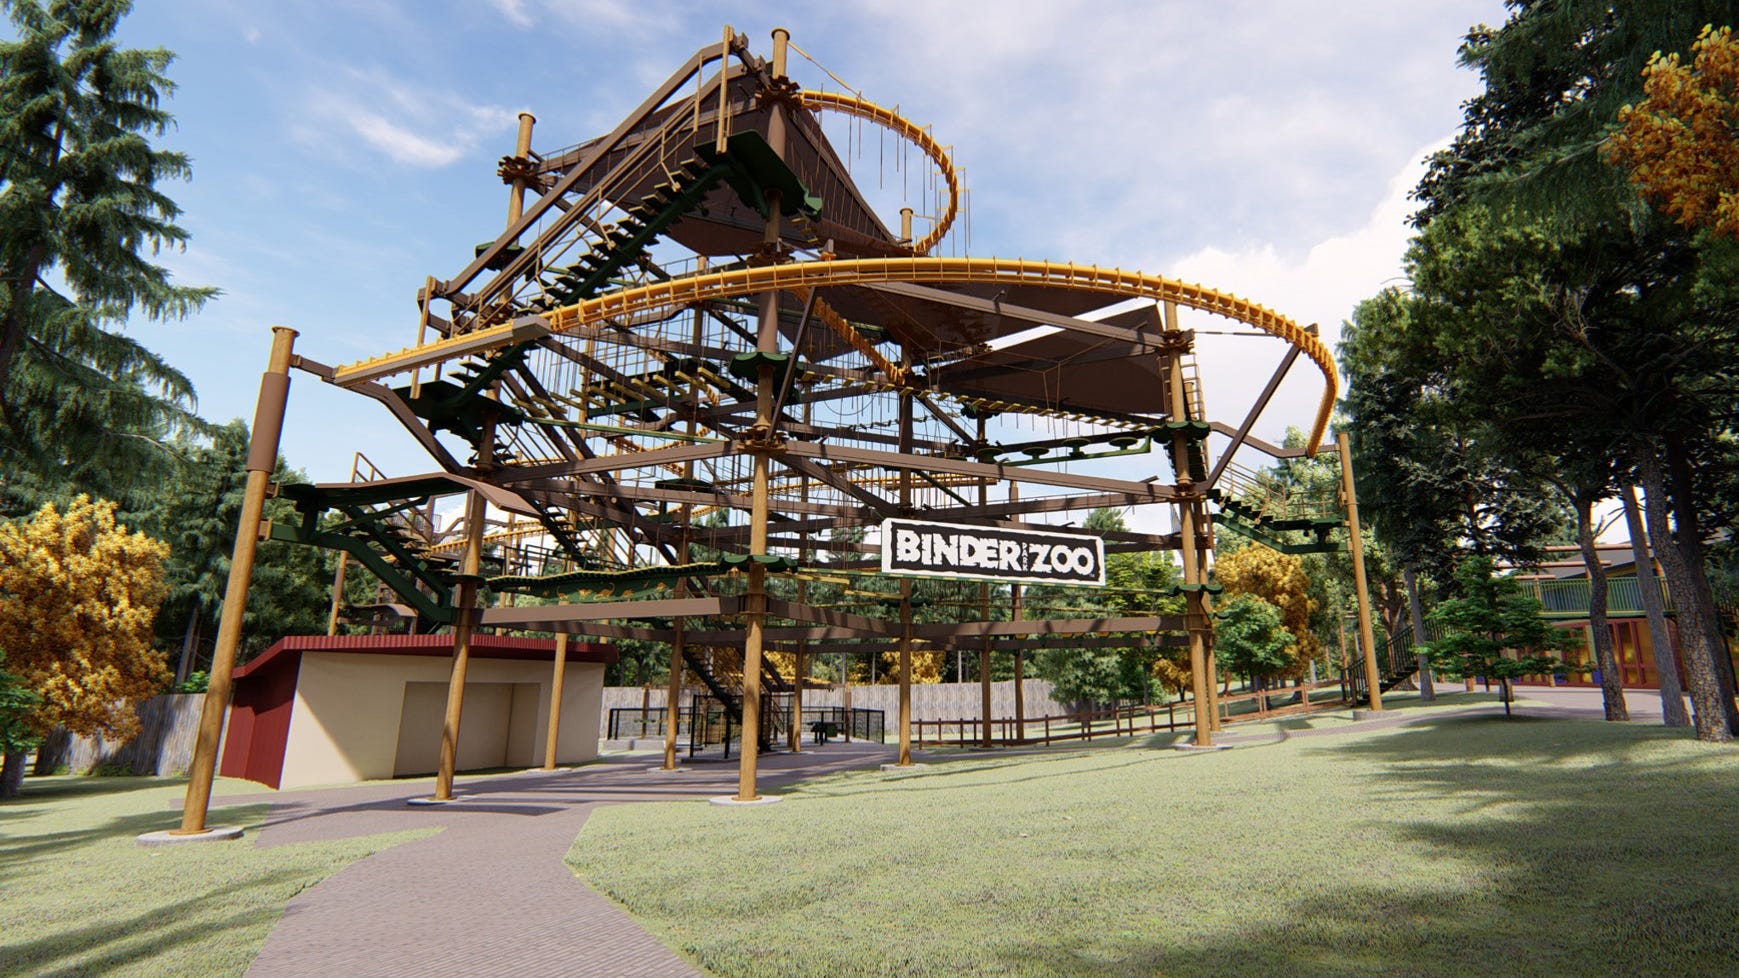 Binder Park Zoo building $2 million high ropes and zip line attraction